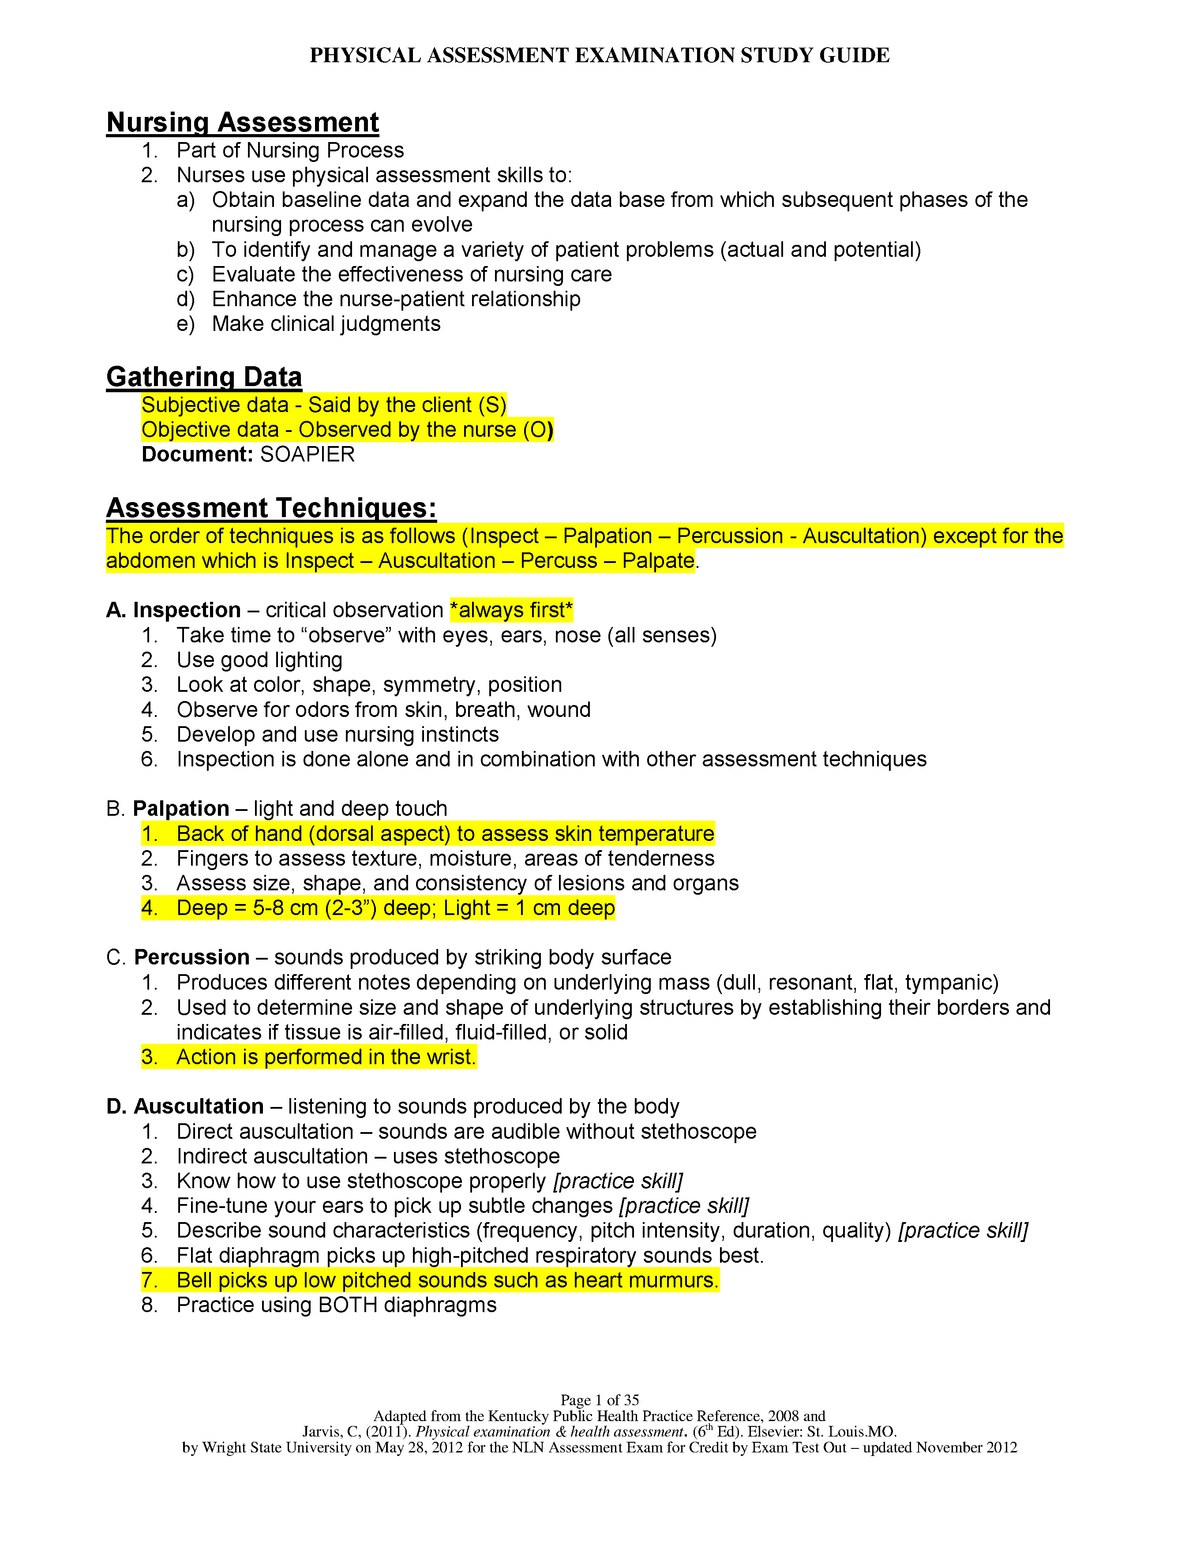 Physical Assessment Exam Study Guide Physical Assessment Examination